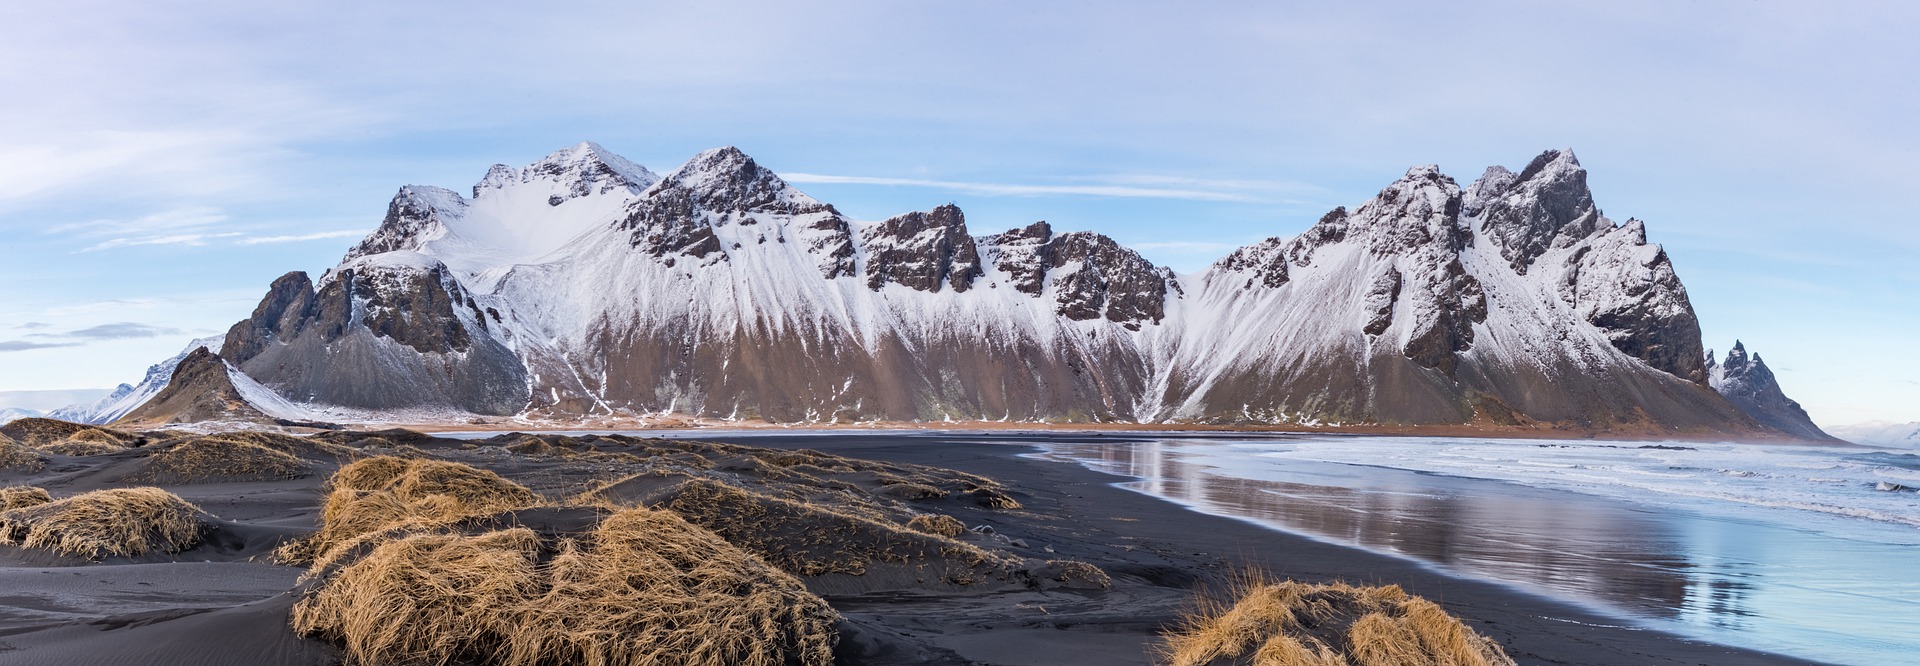 Stokksnes black sand beach with Vestrahorn mountains in the background